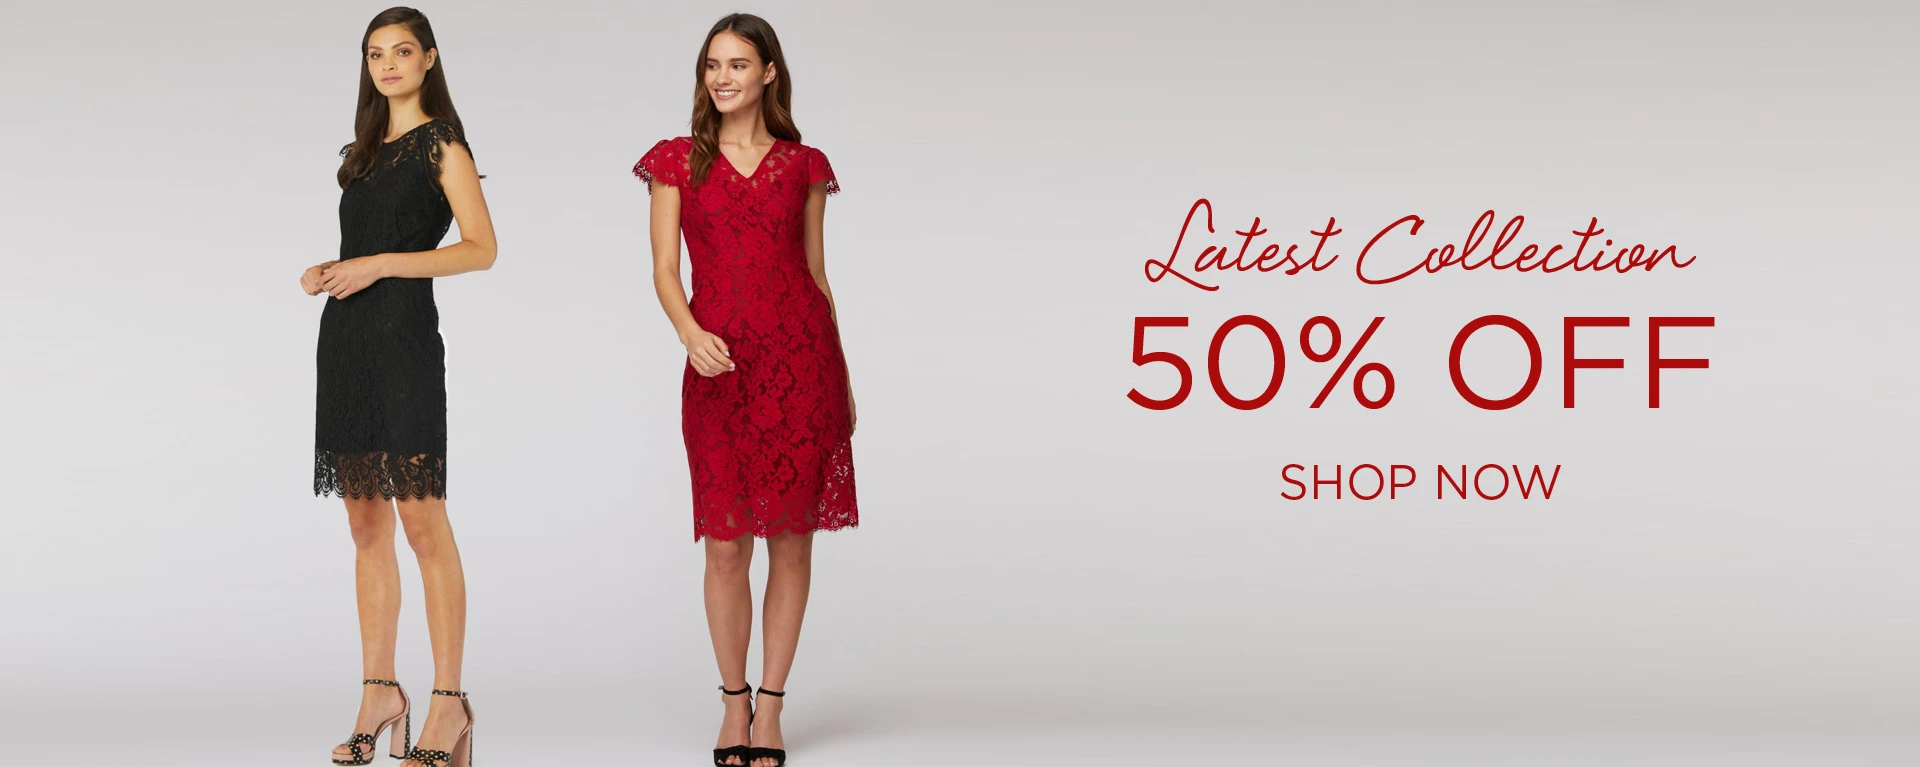 50% OFF on latest collection